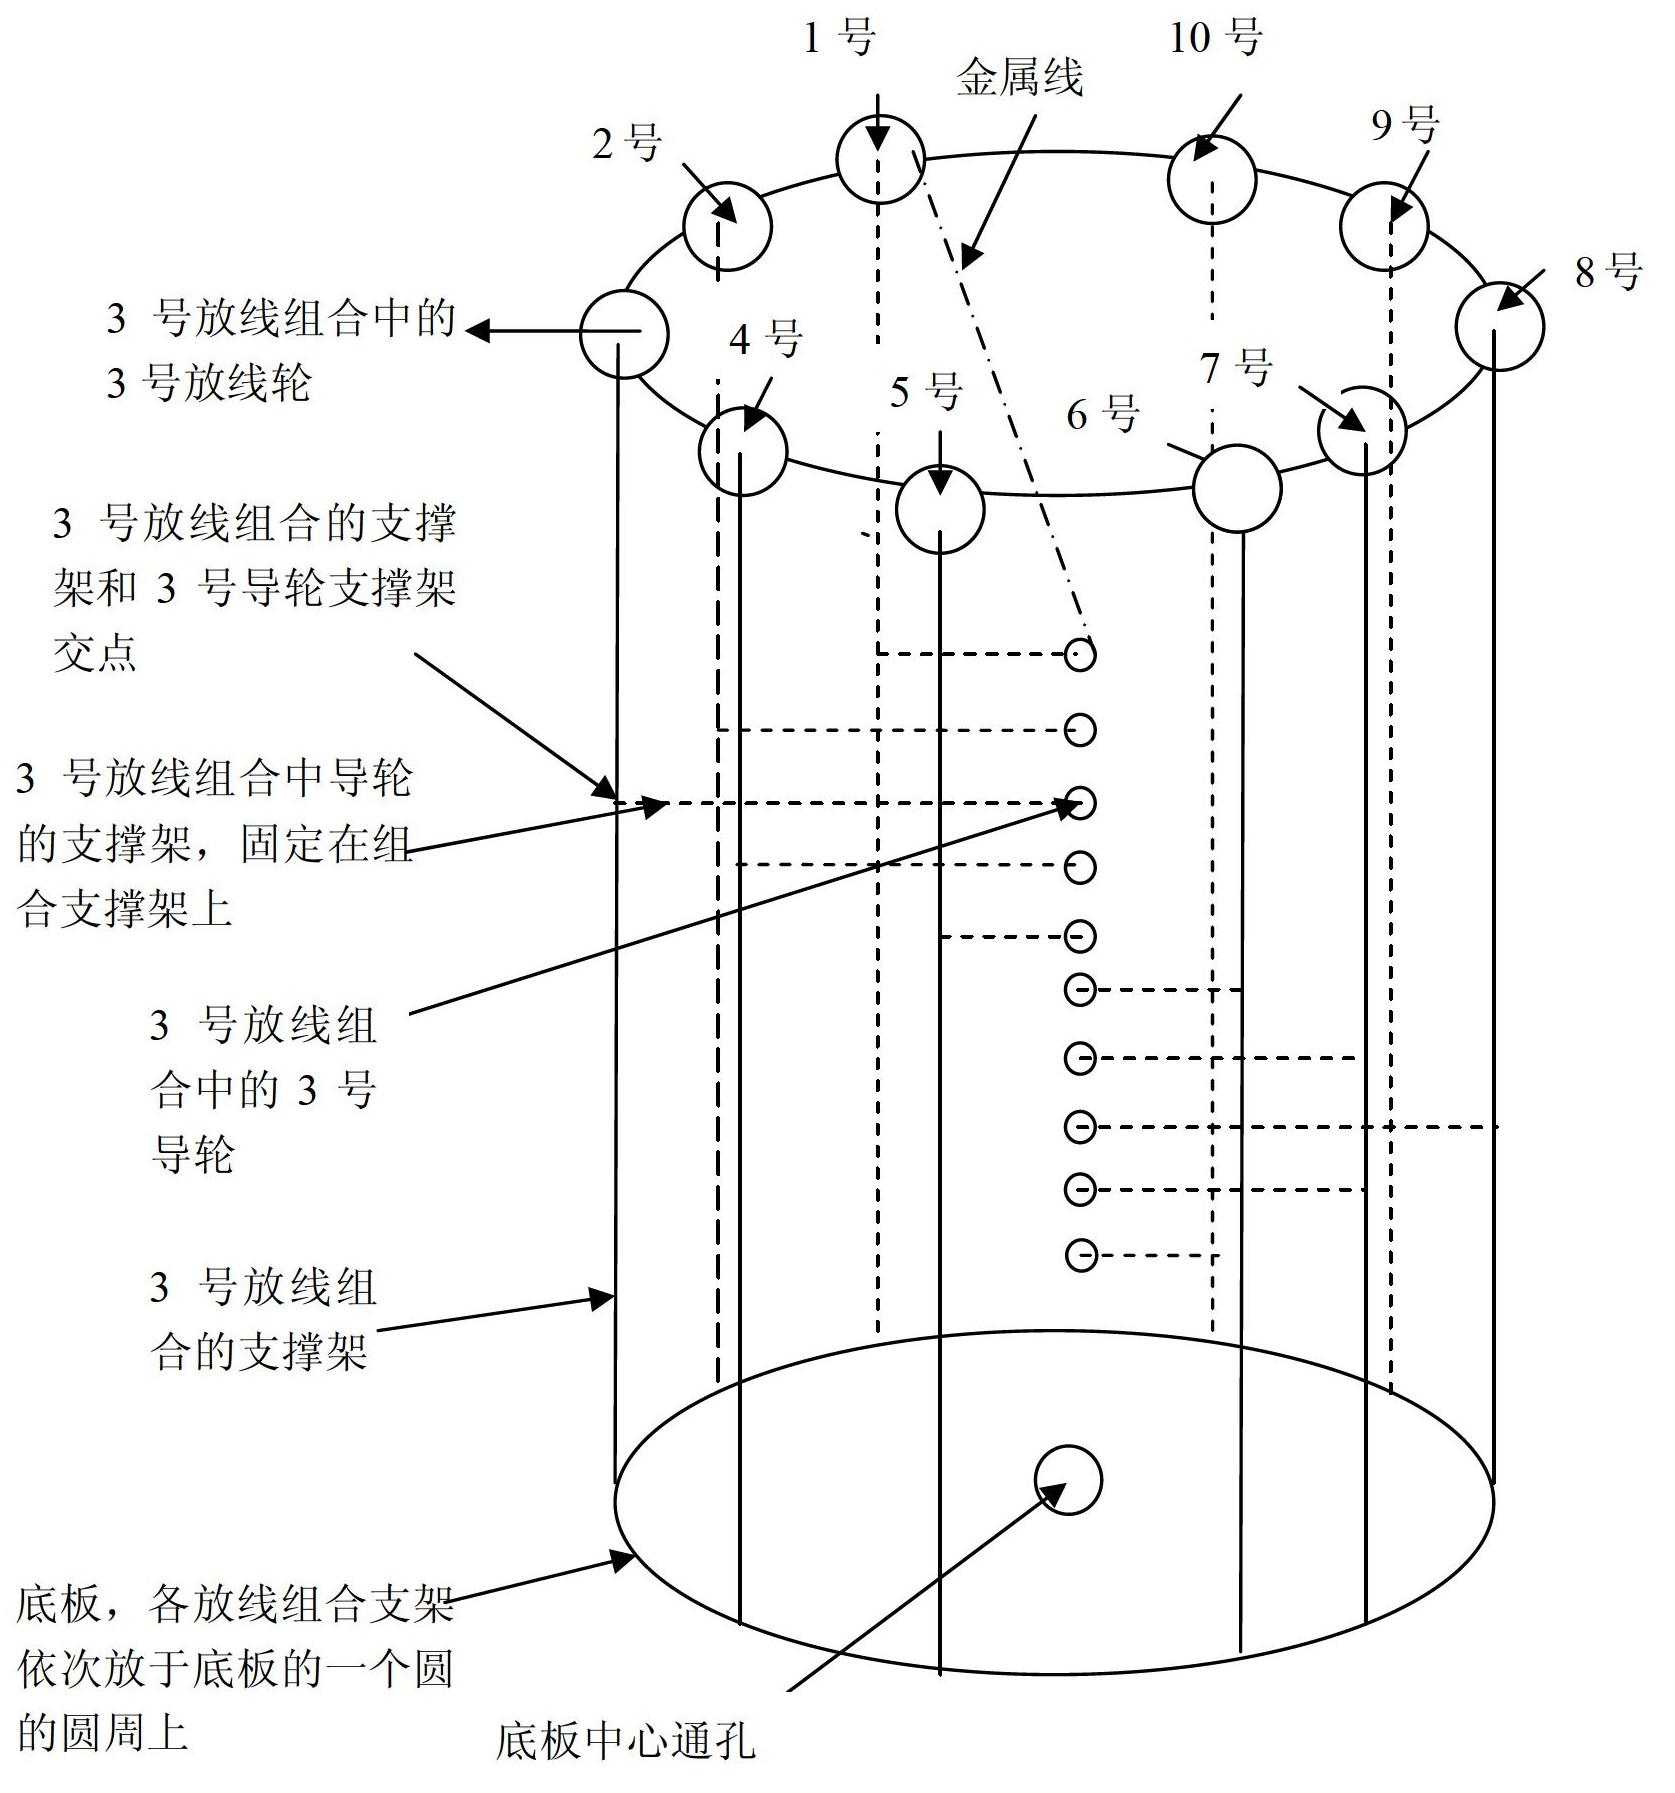 Continuous preparation equipment and process for fiber-reinforced metal glass composite filament